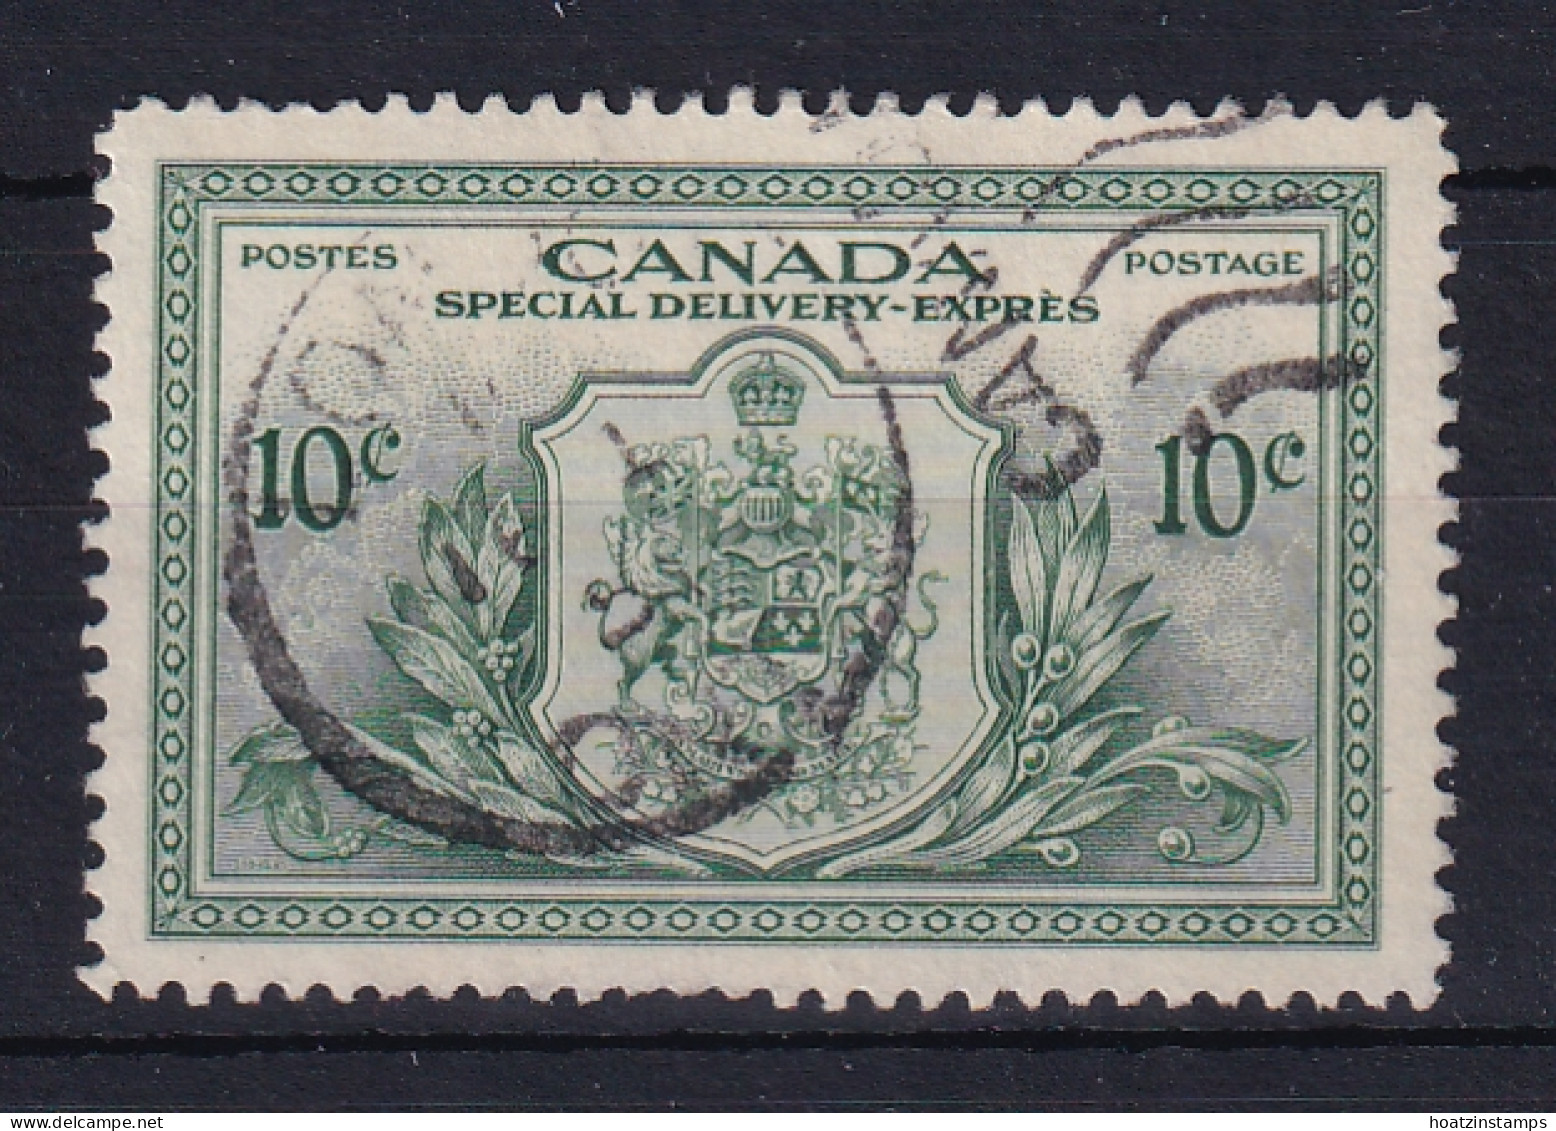 Canada: 1946   Special Delivery   SG S15    10c   Used - Exprès